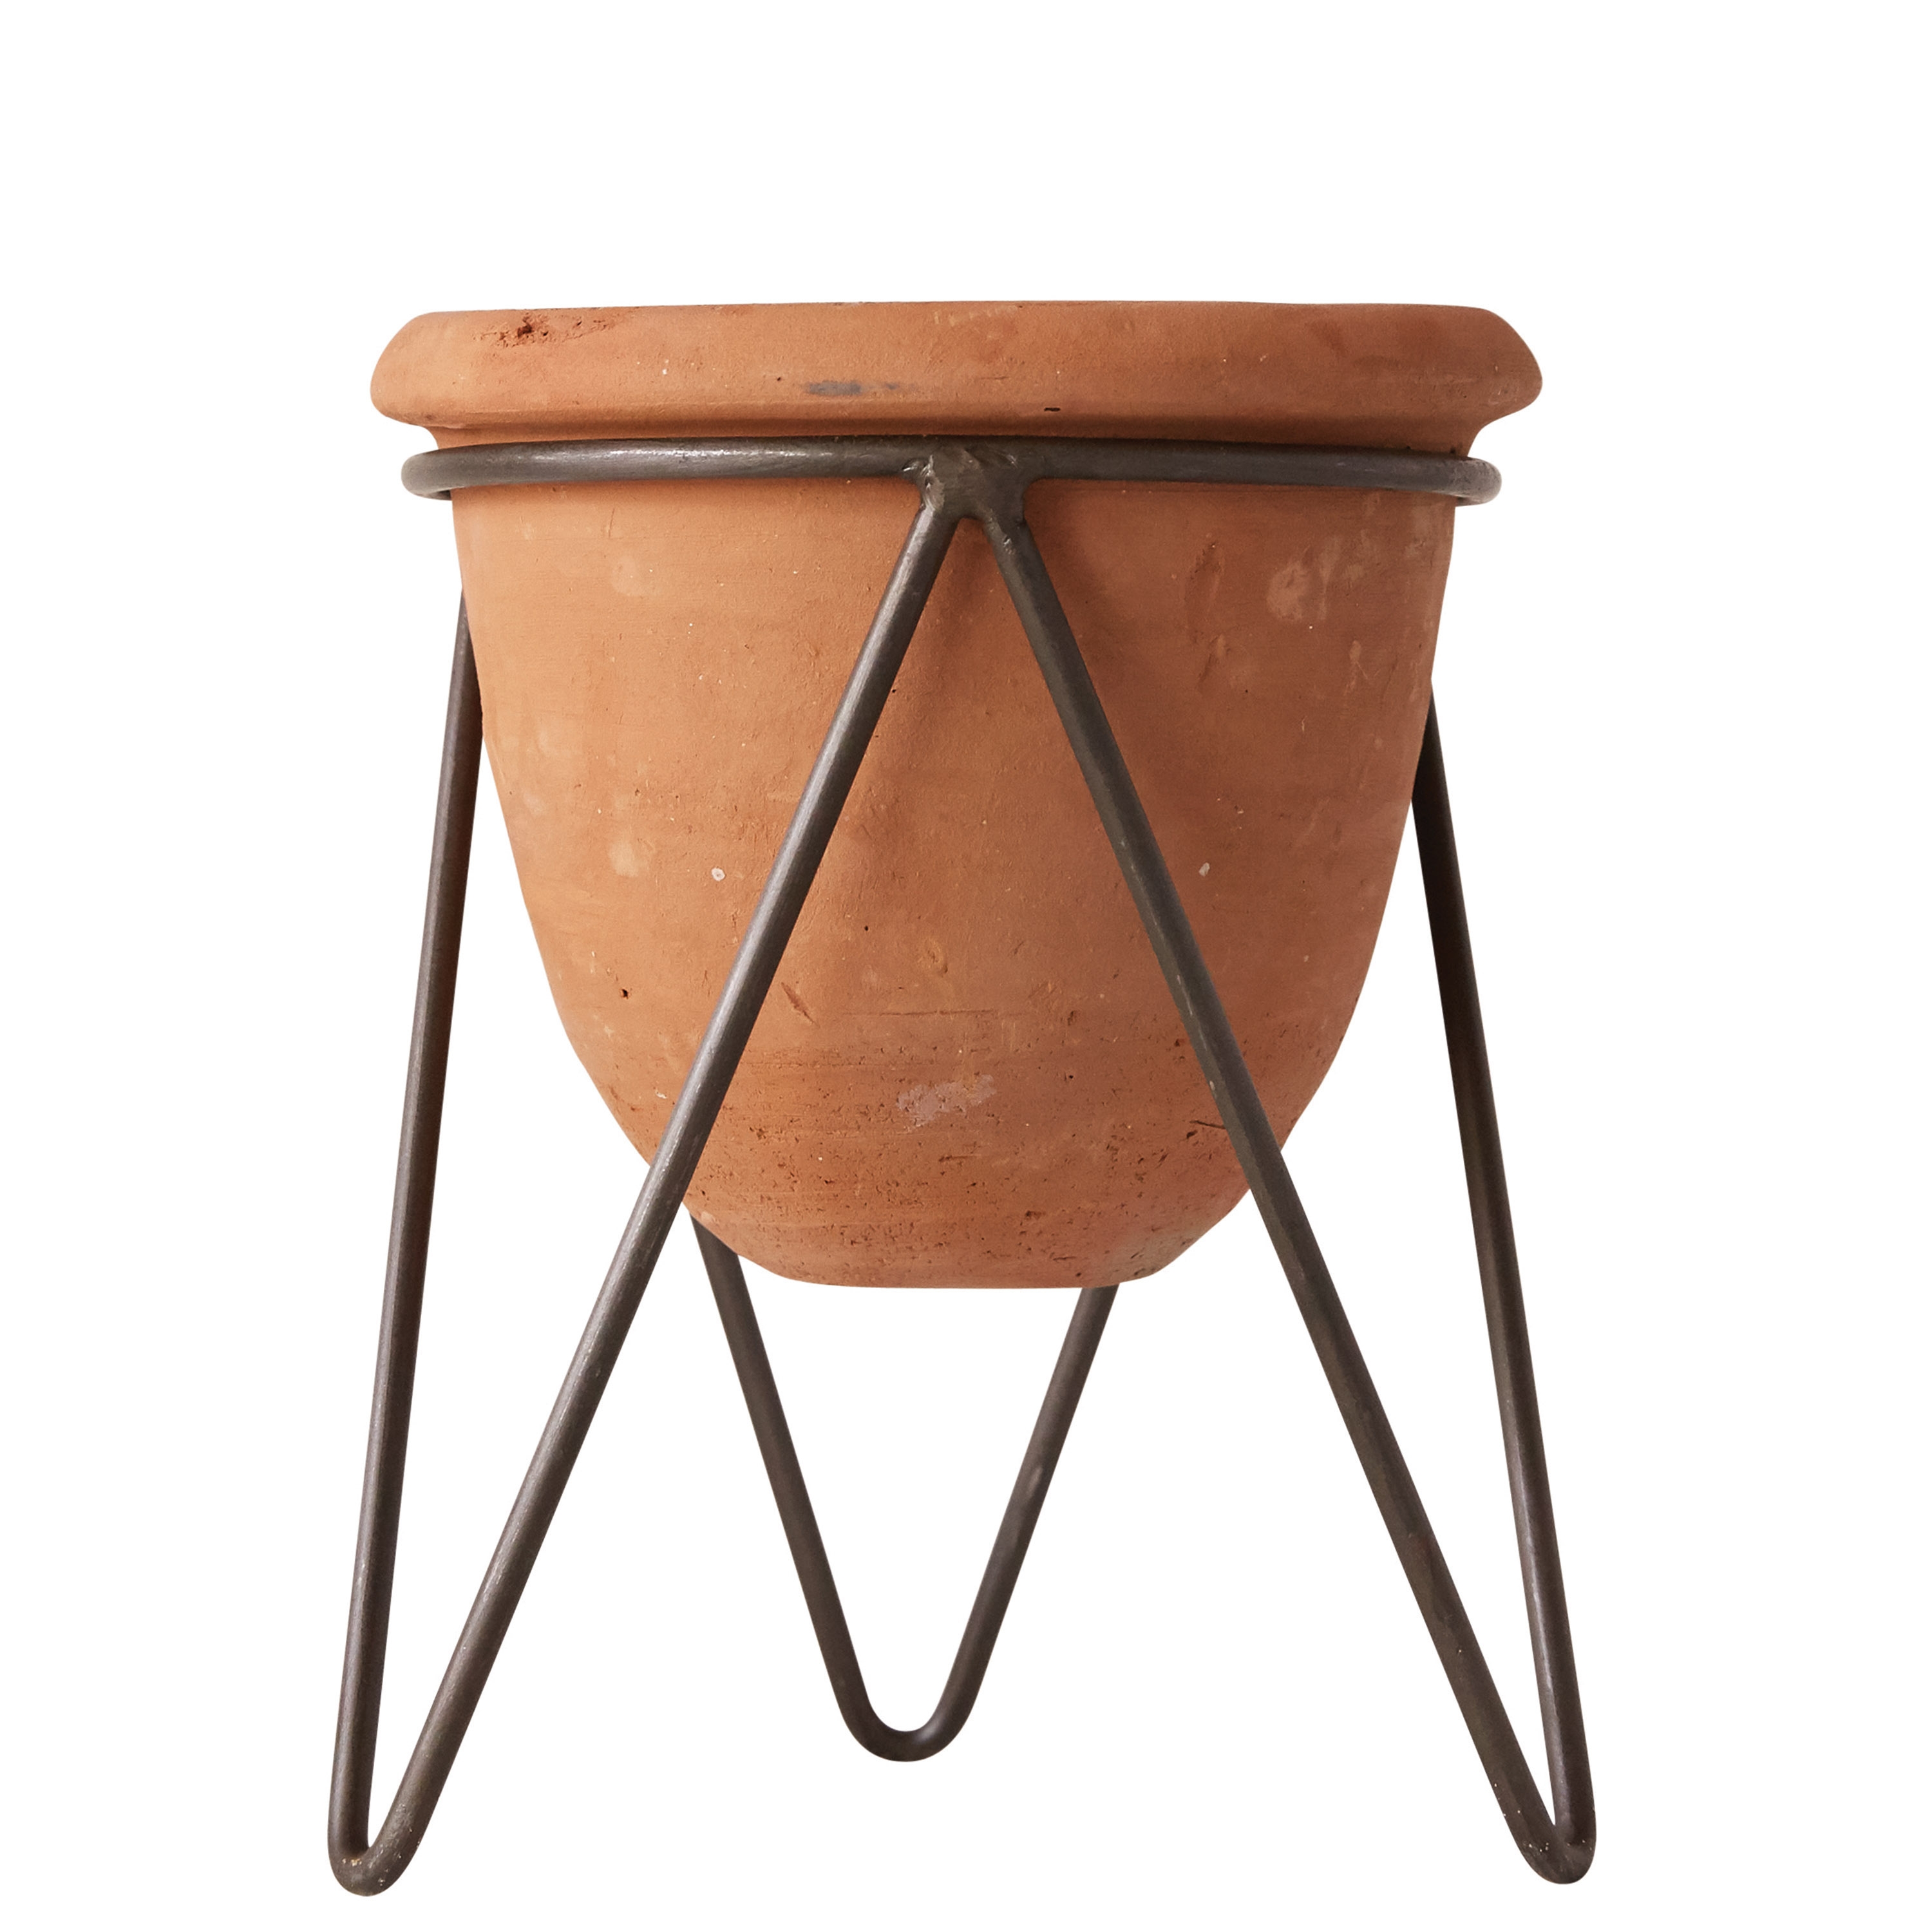 Terracotta Pot with Metal Stand (Set of 2 Pieces) - Image 0